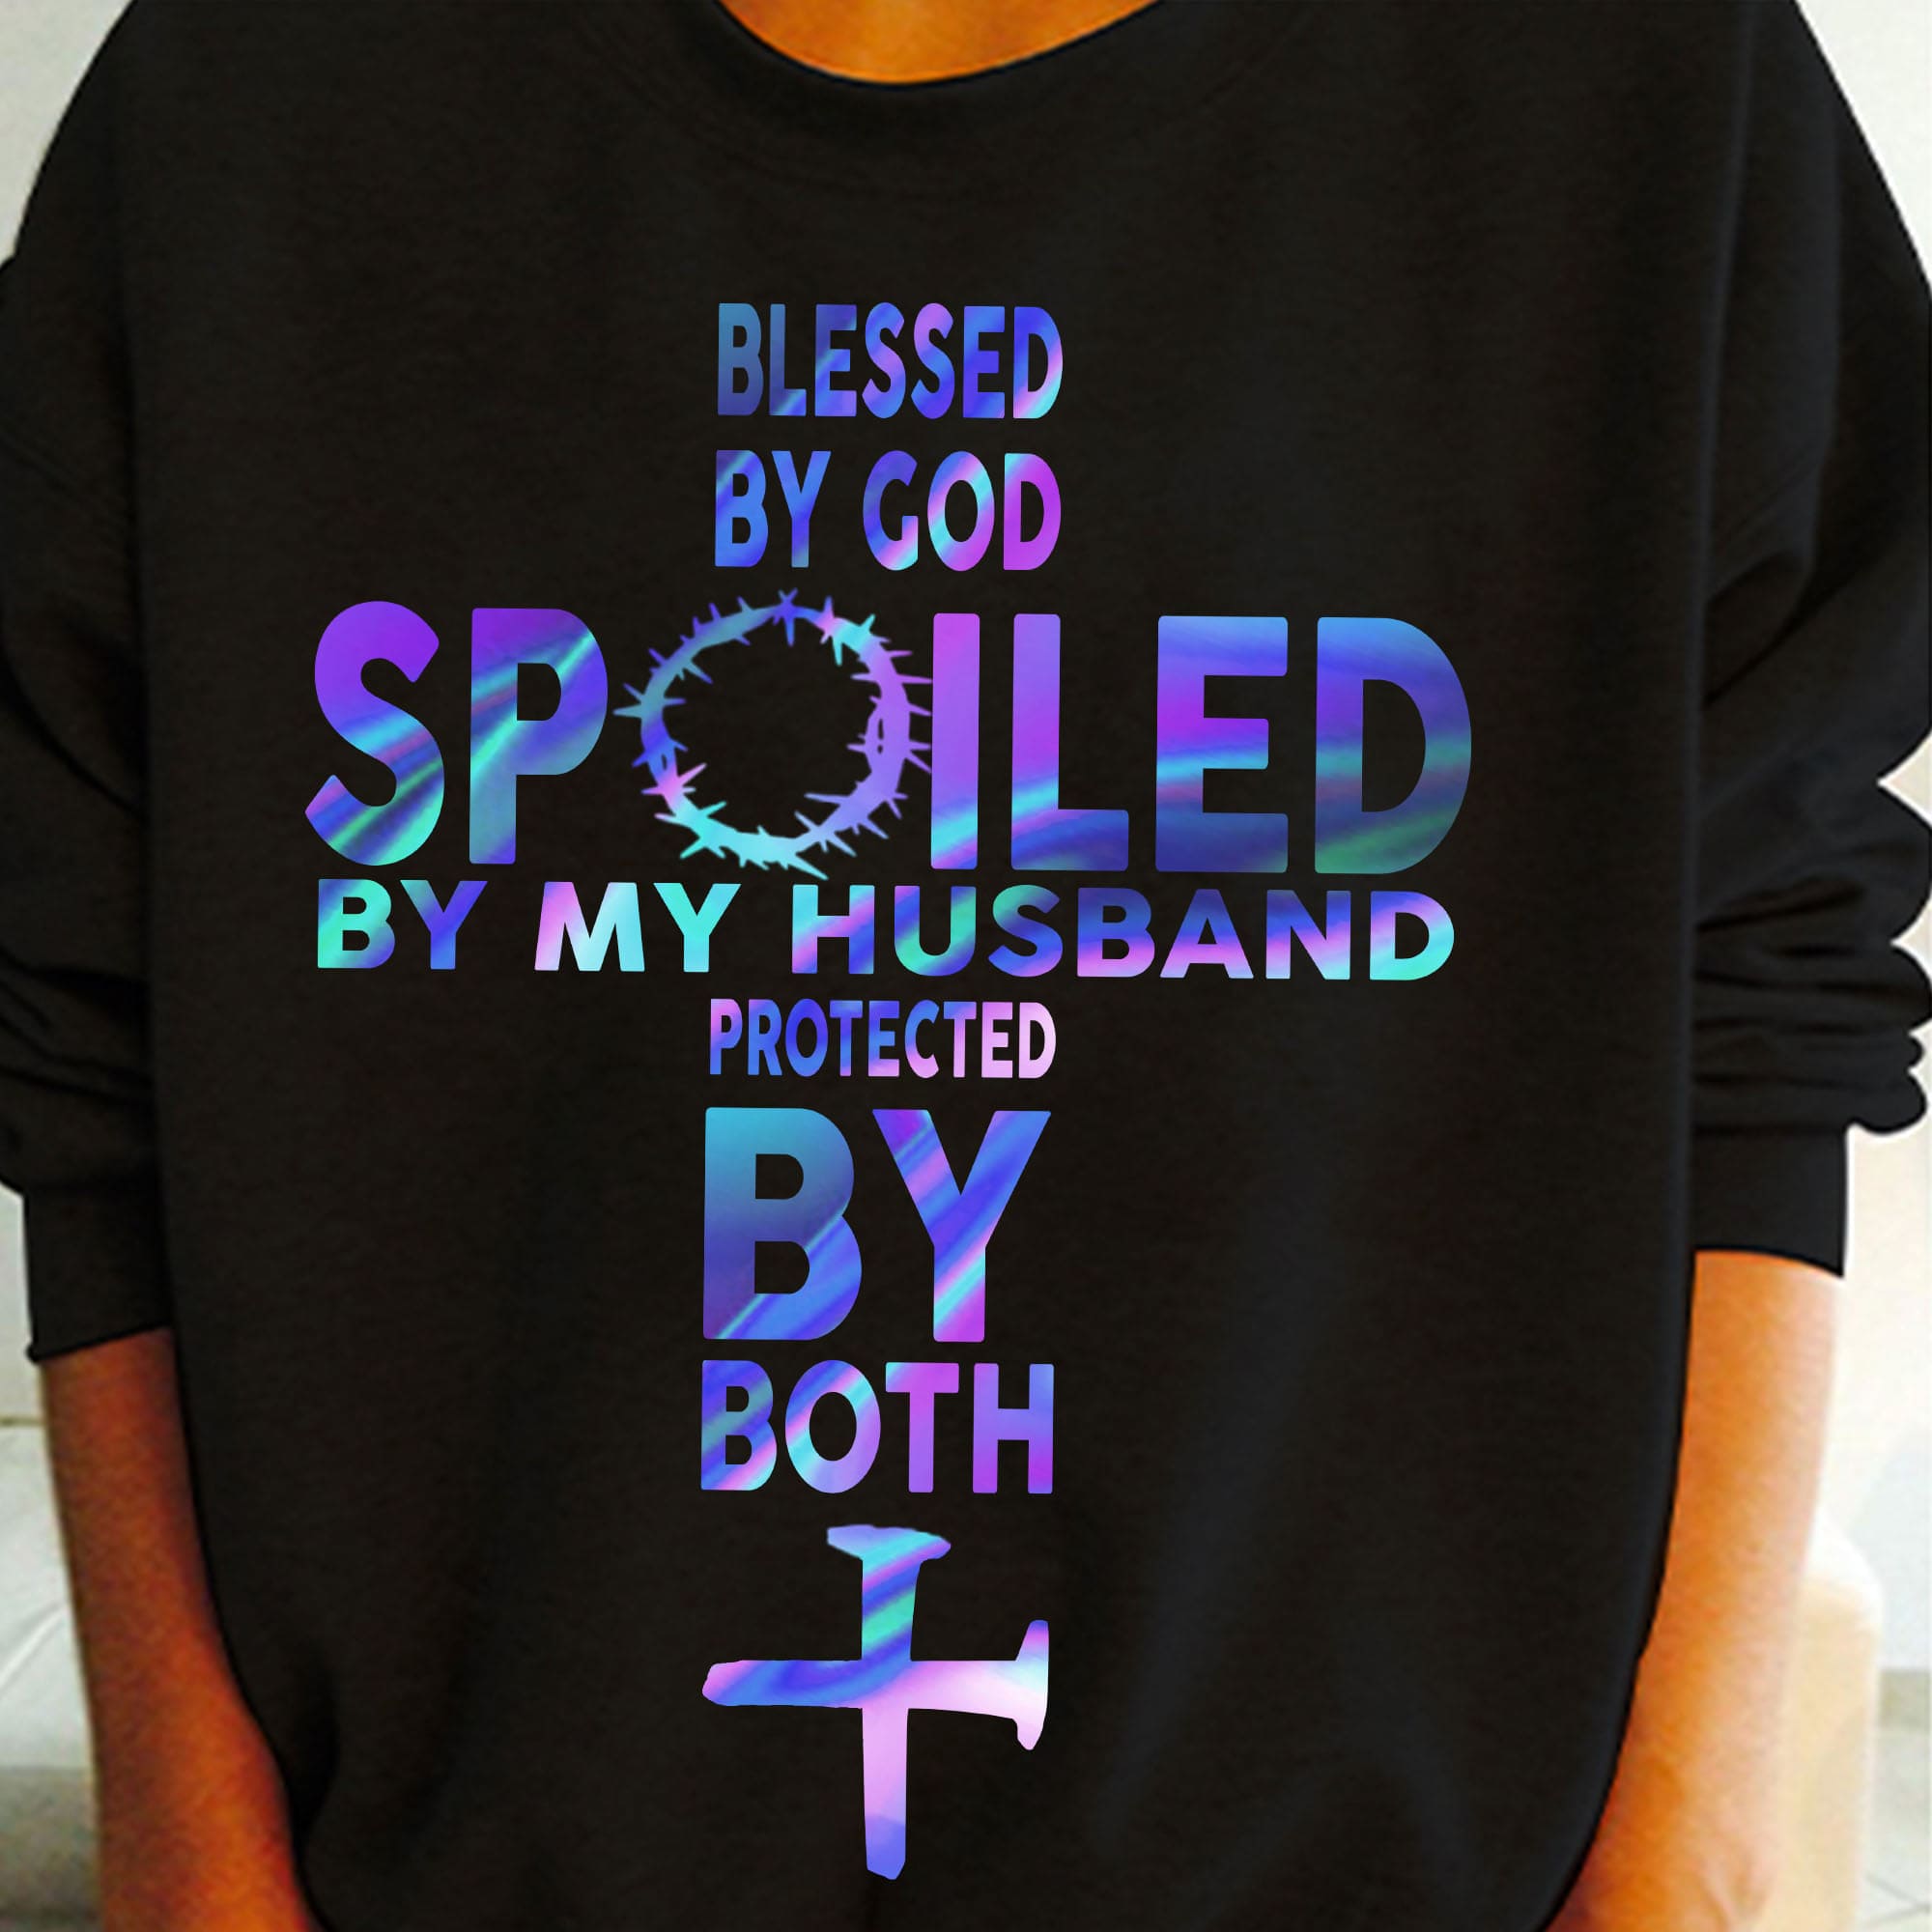 Blessed by god spoiled by my husband protected by both